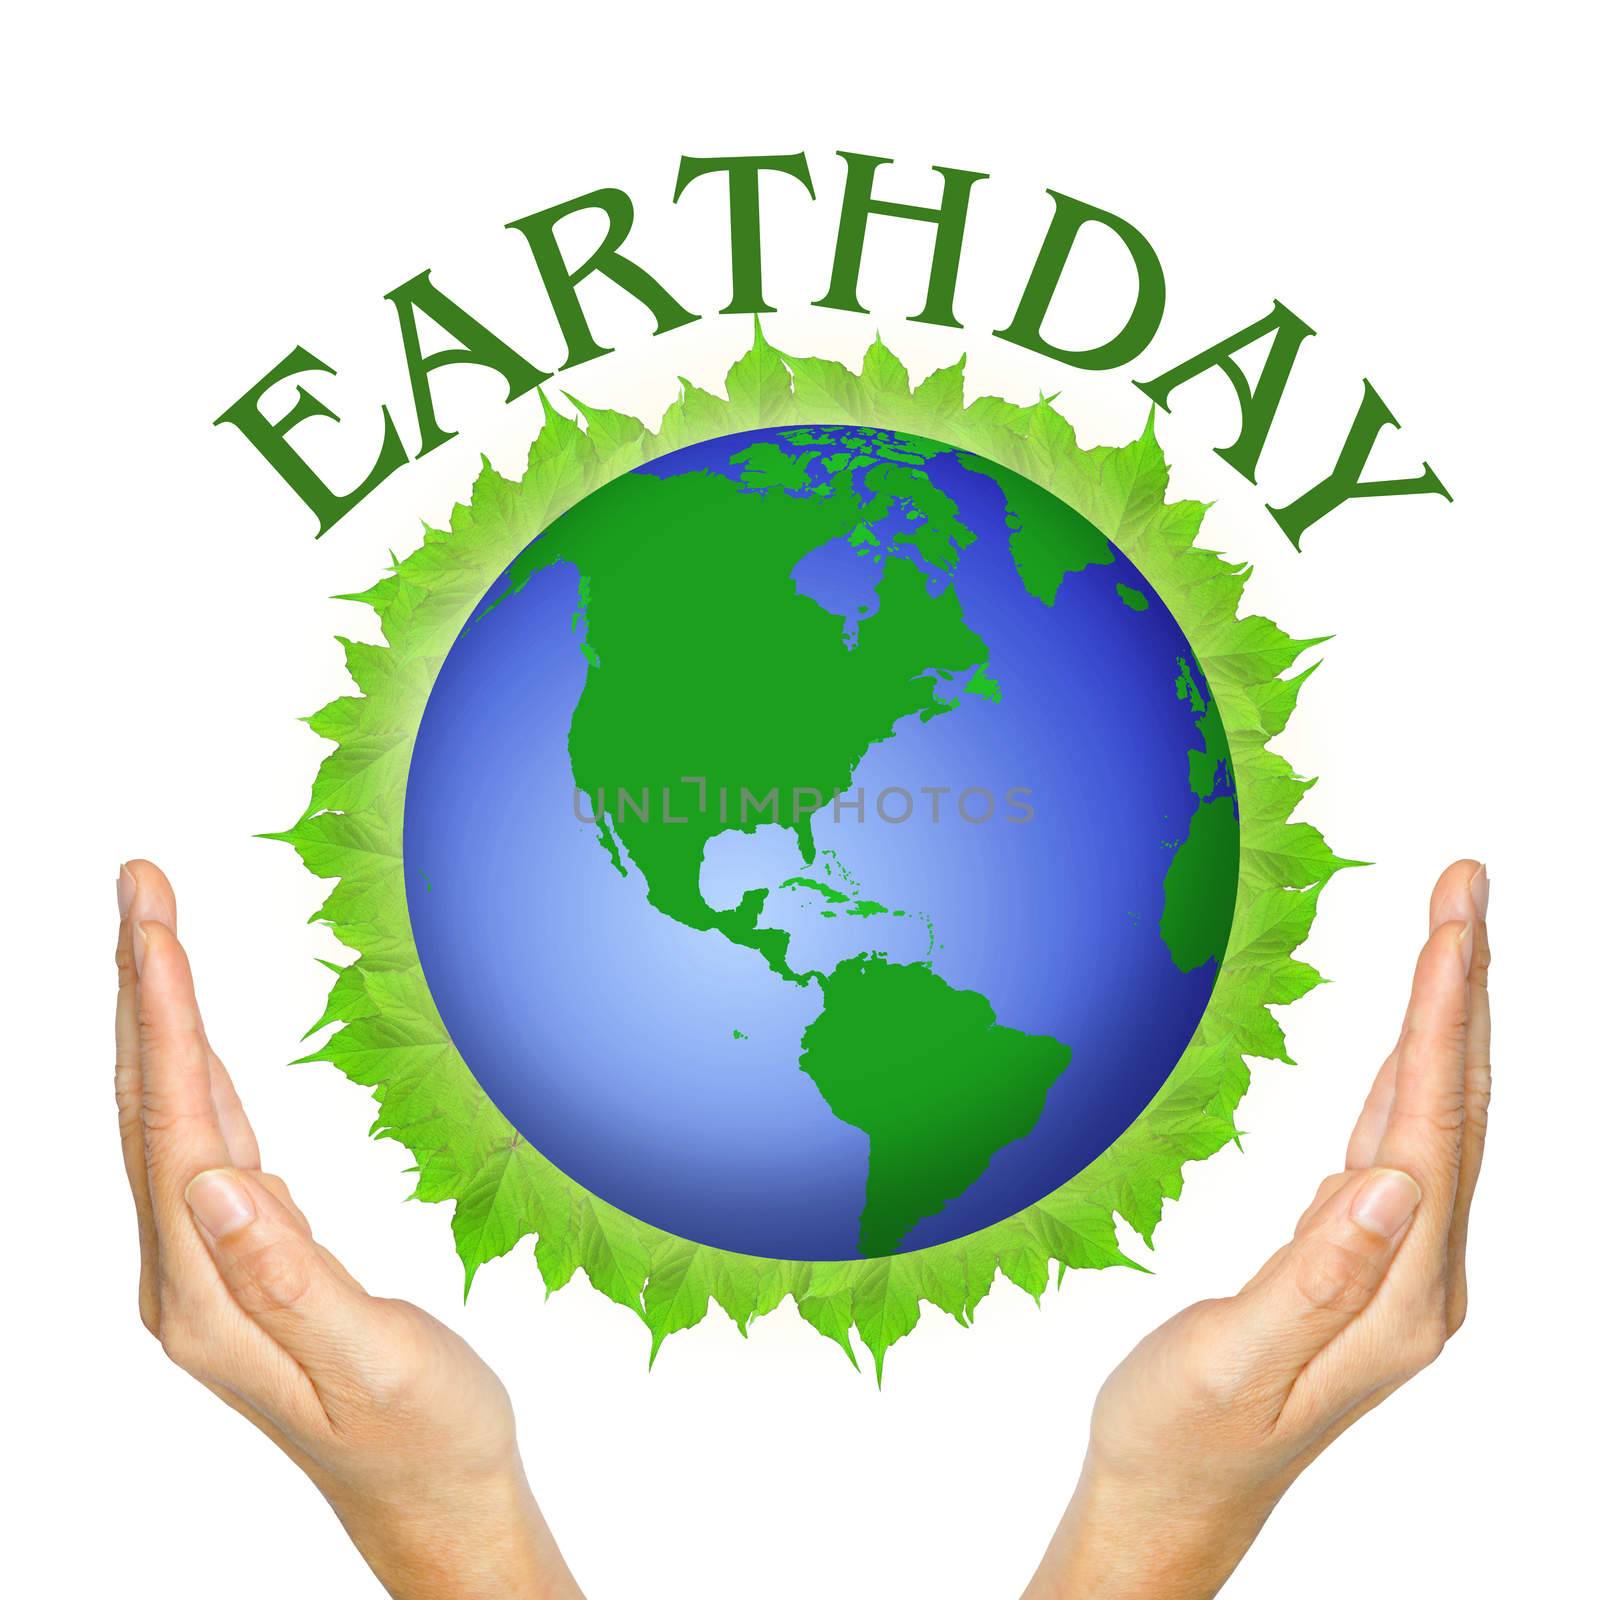 hands and globe on leaves and wording Earthday by Gamjai